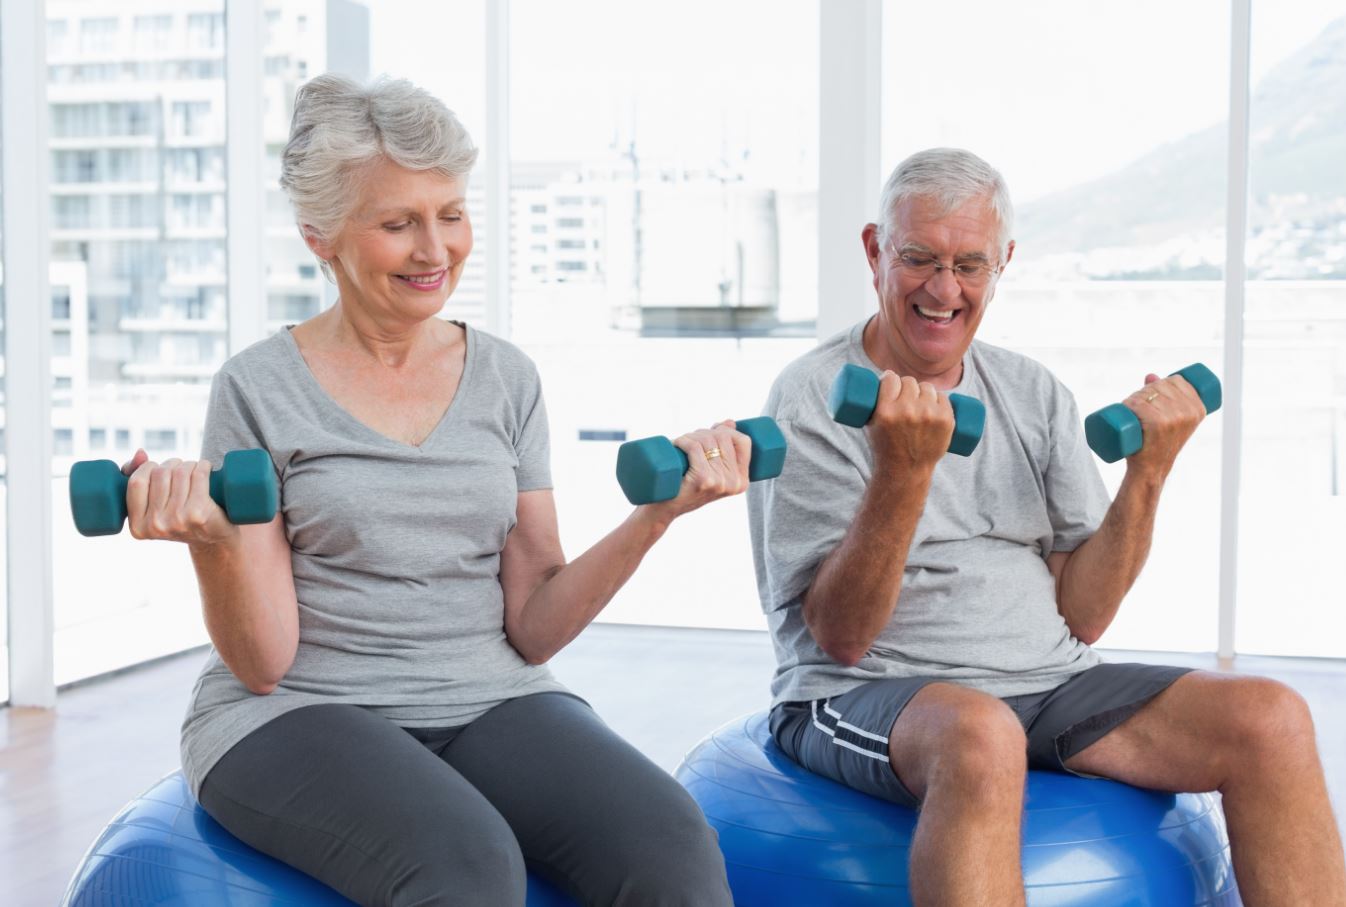 Just A Little More Exercise Adds Years to Life